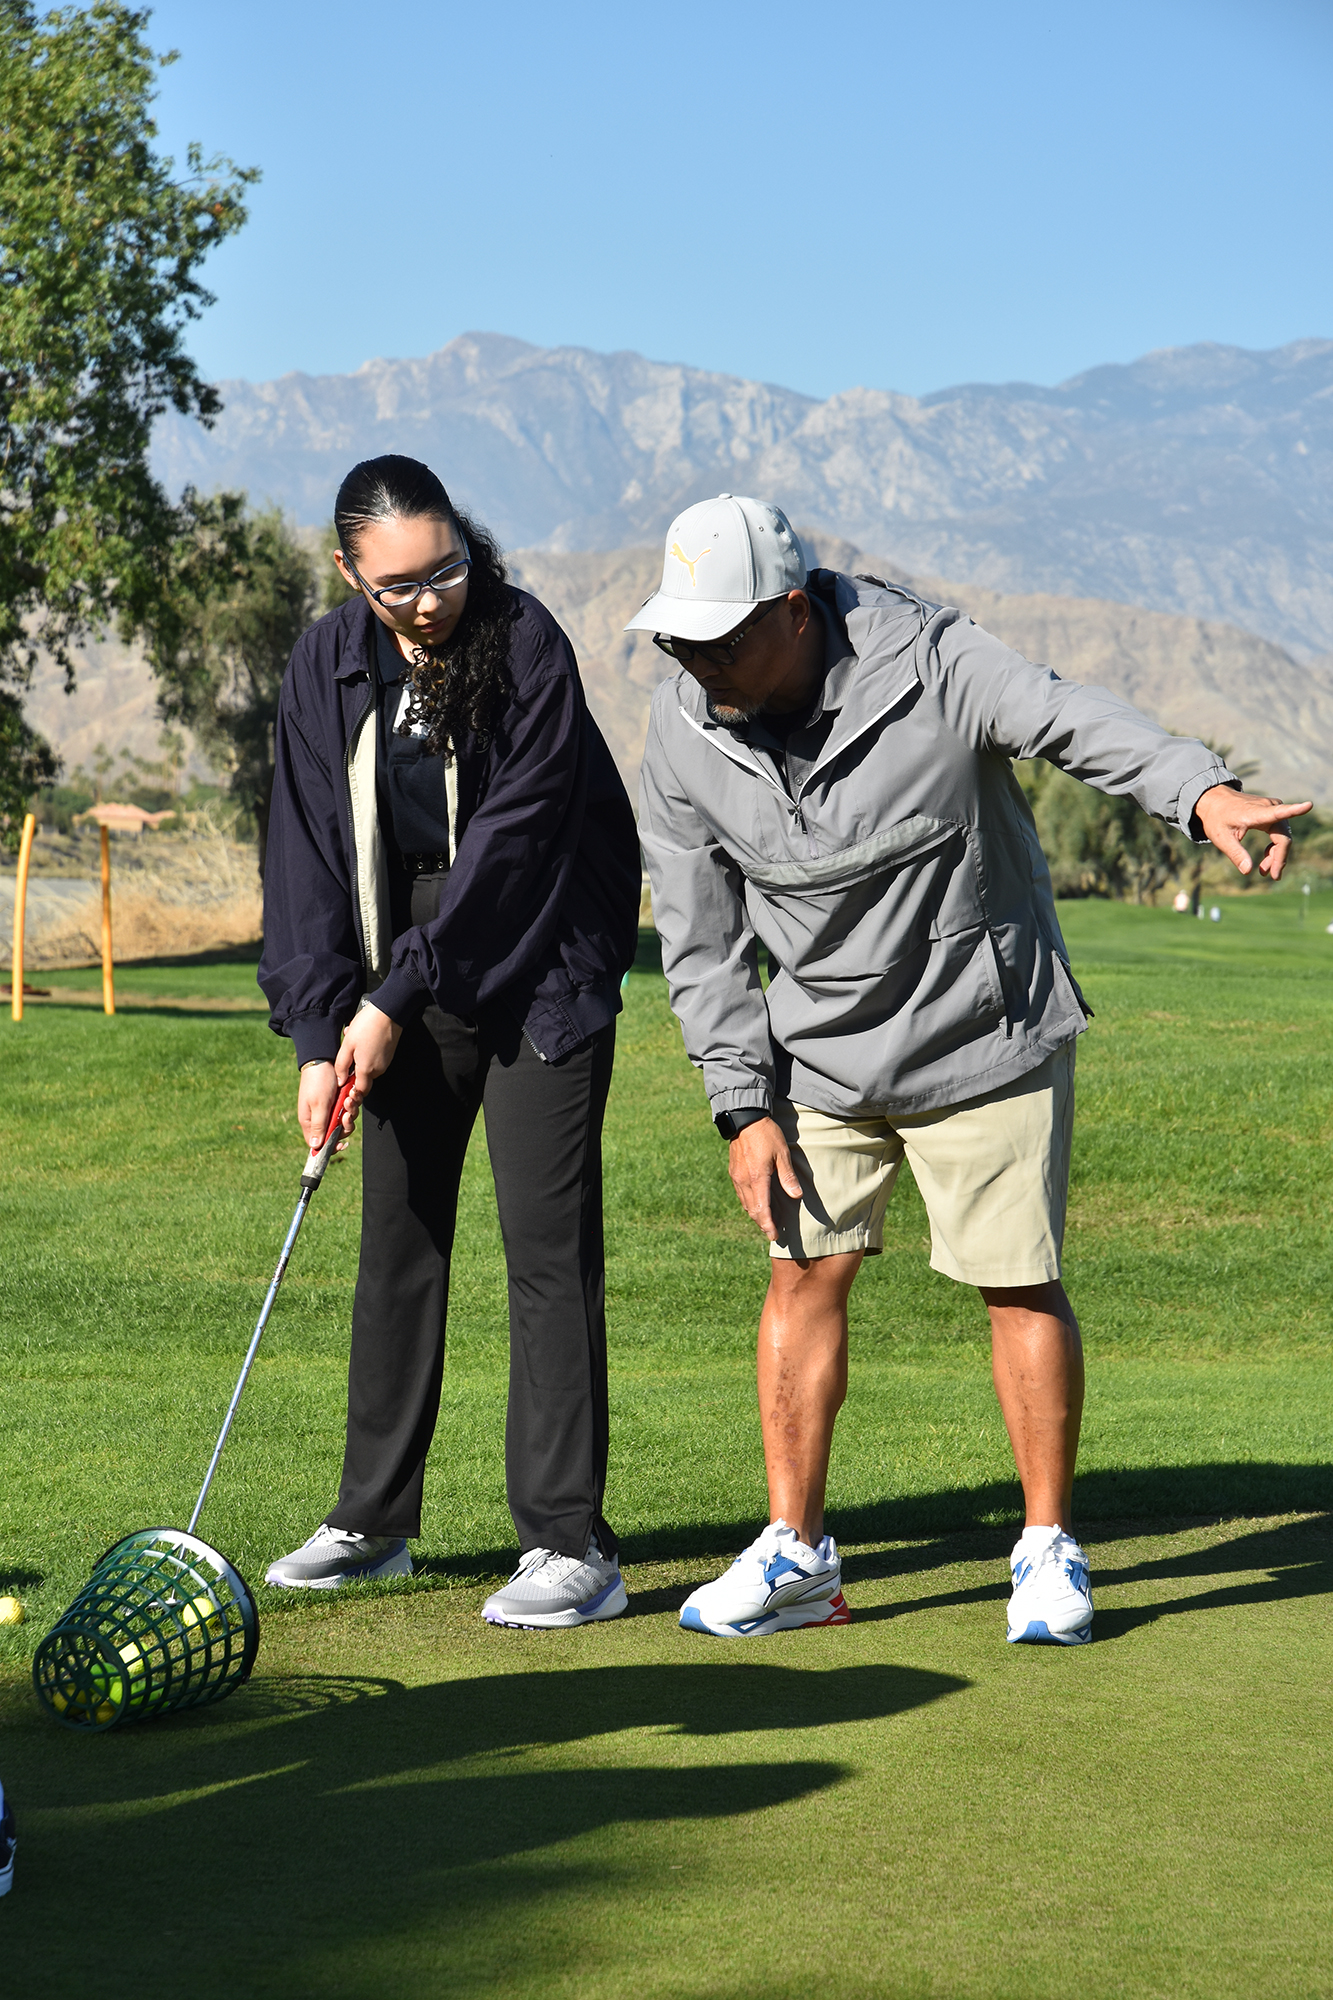 Yuritza stands on a golf course next to coach mimicking his stance while aligning golf club for a swing